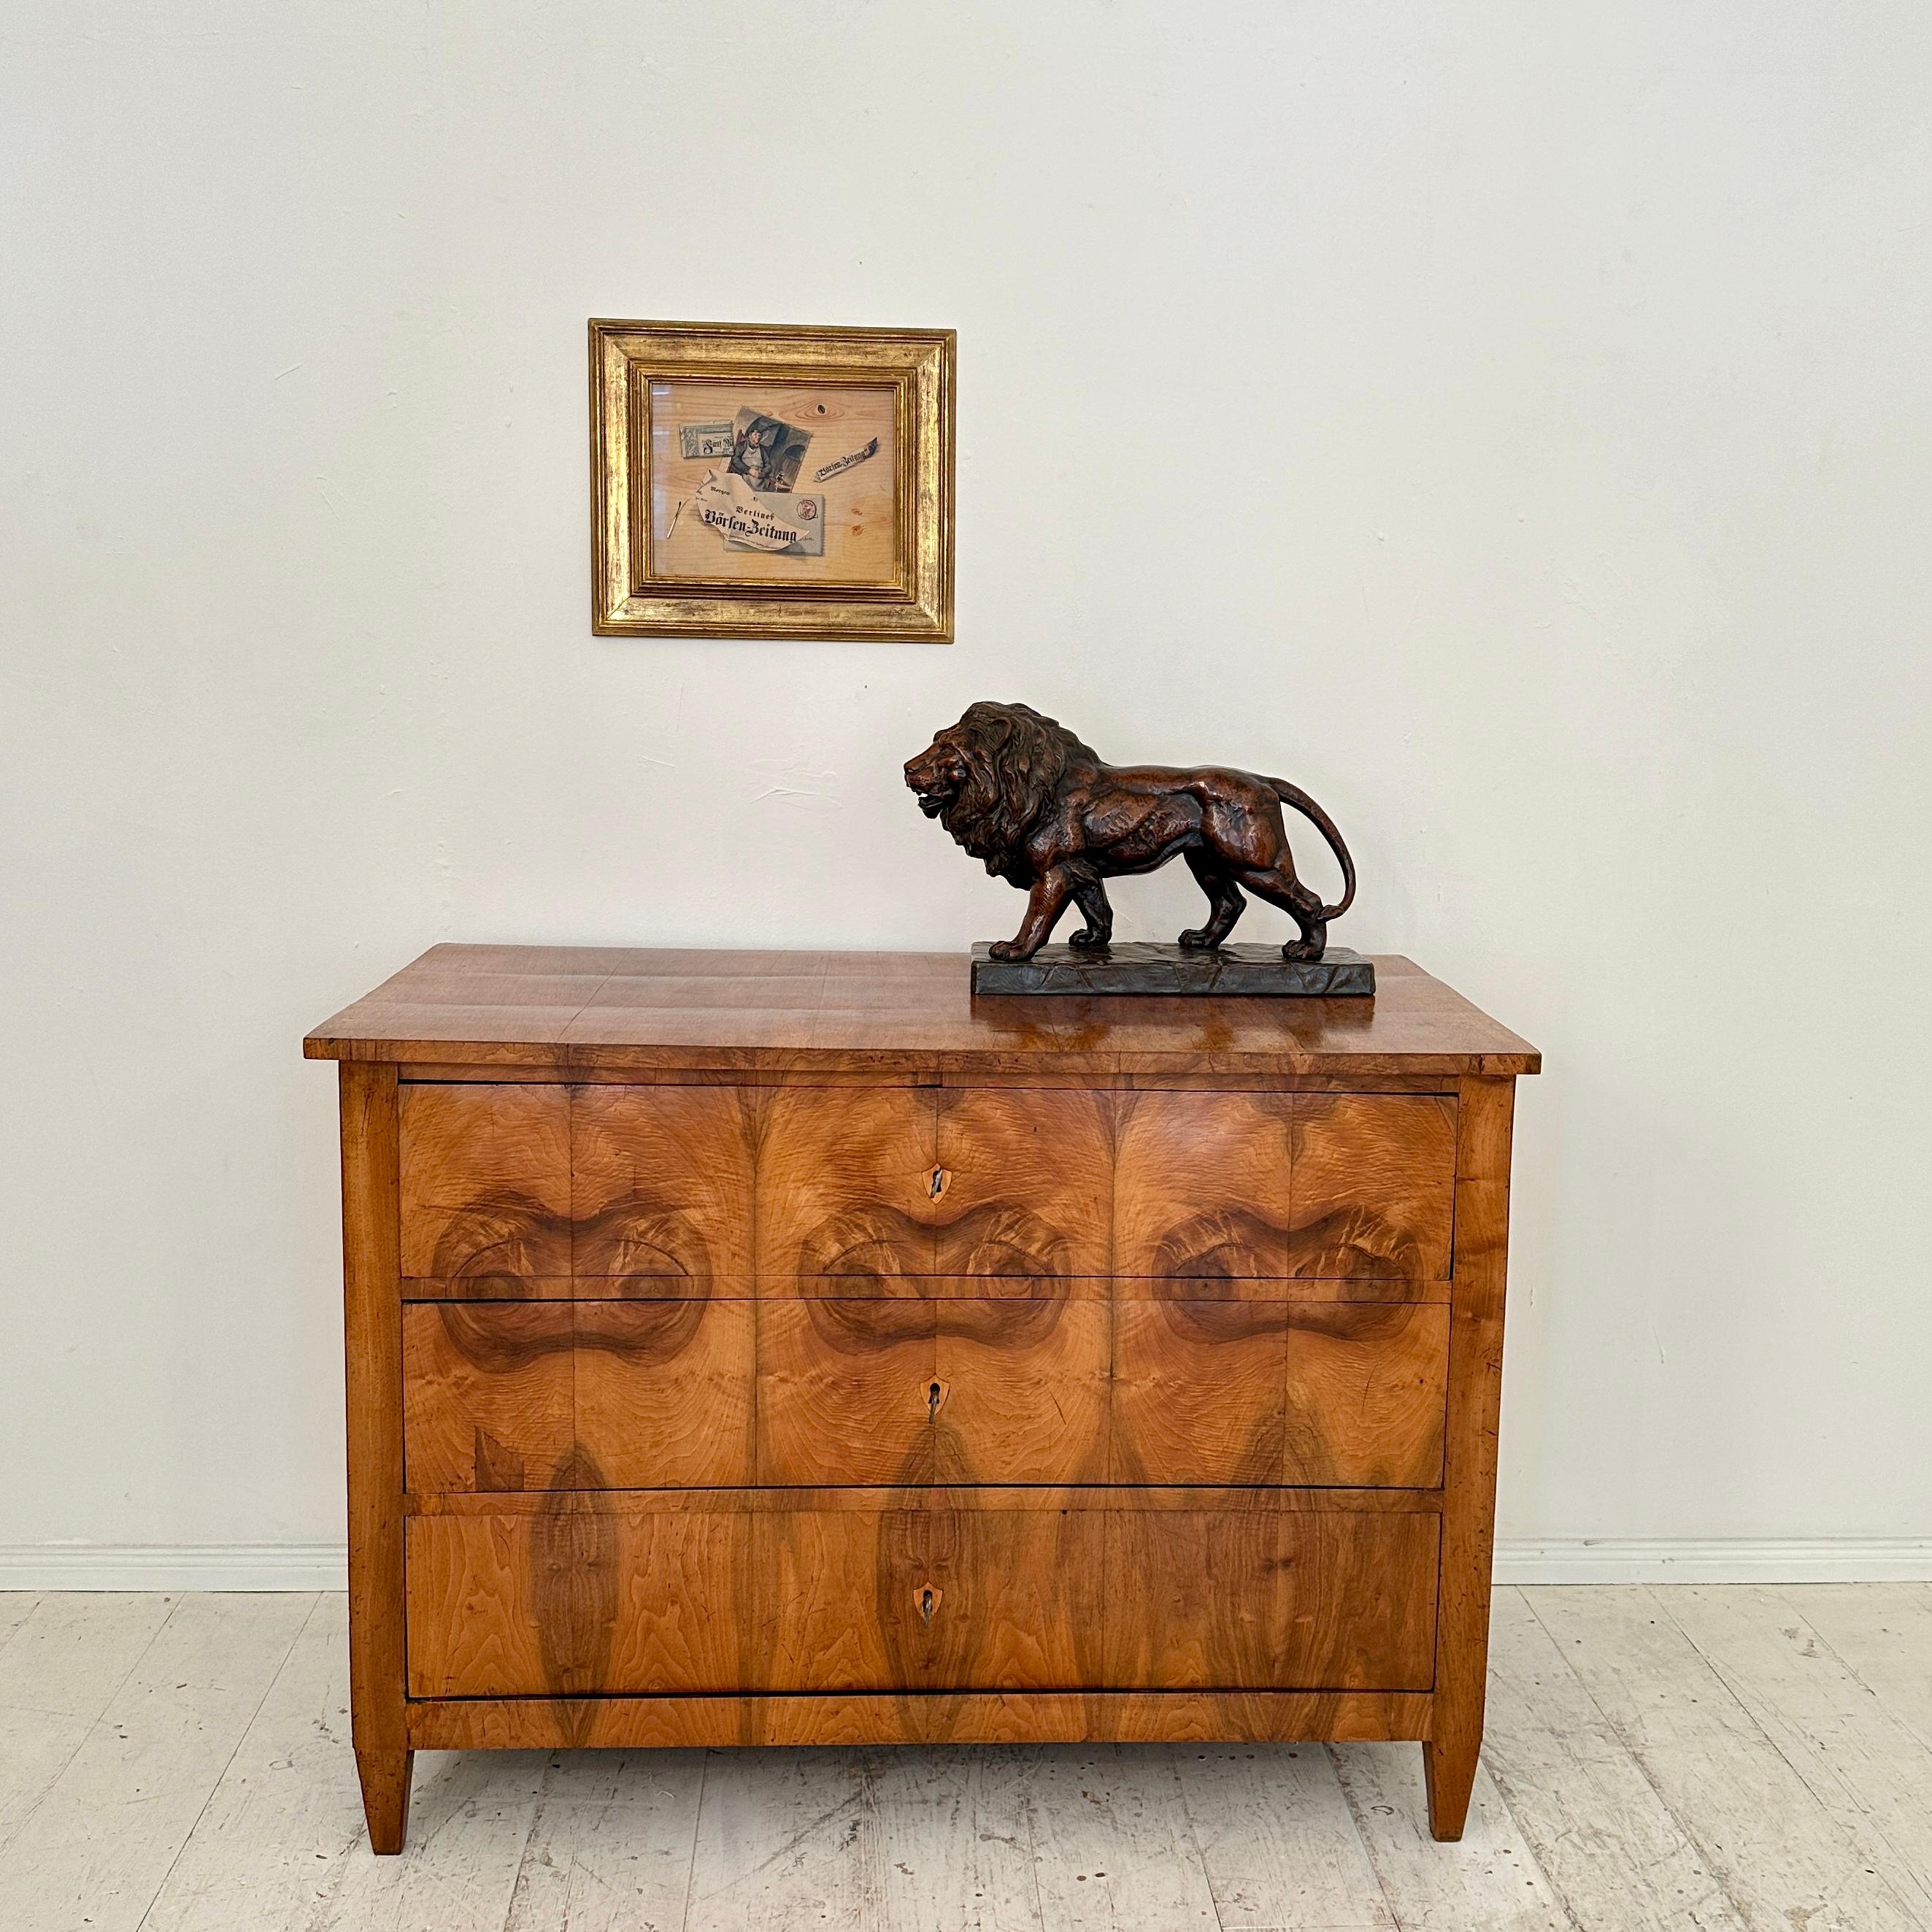 Early 19th Century 19th Century German Biedermeier Chest of Drawers in Walnut with 3 Drawers, 1820 For Sale